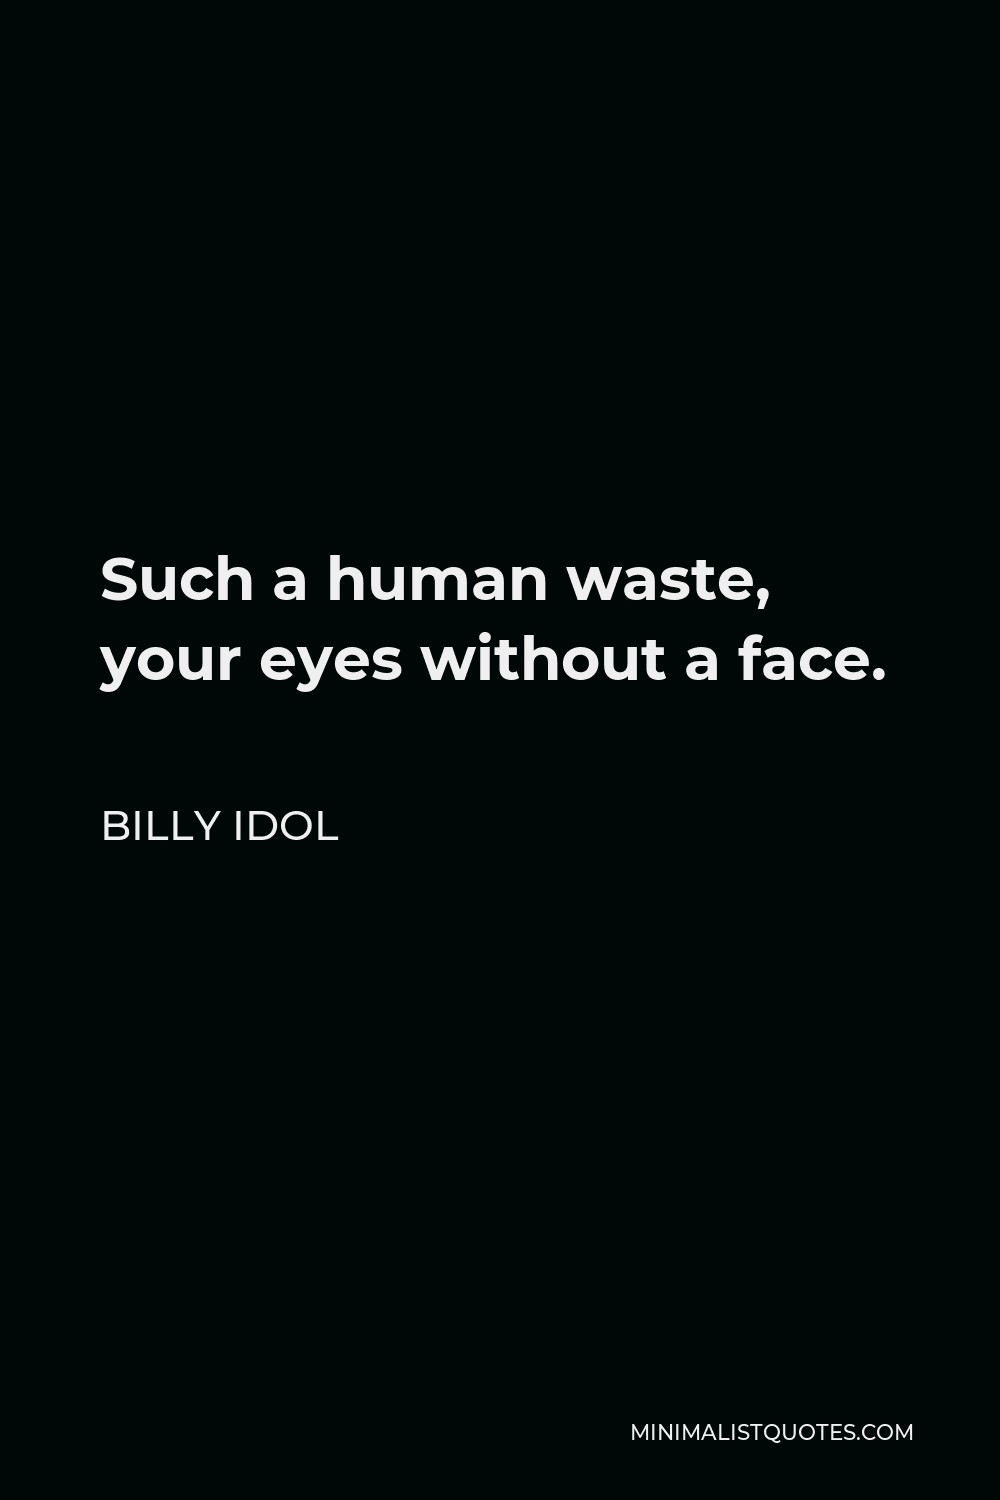 Billy Idol Quote - Such a human waste, your eyes without a face.